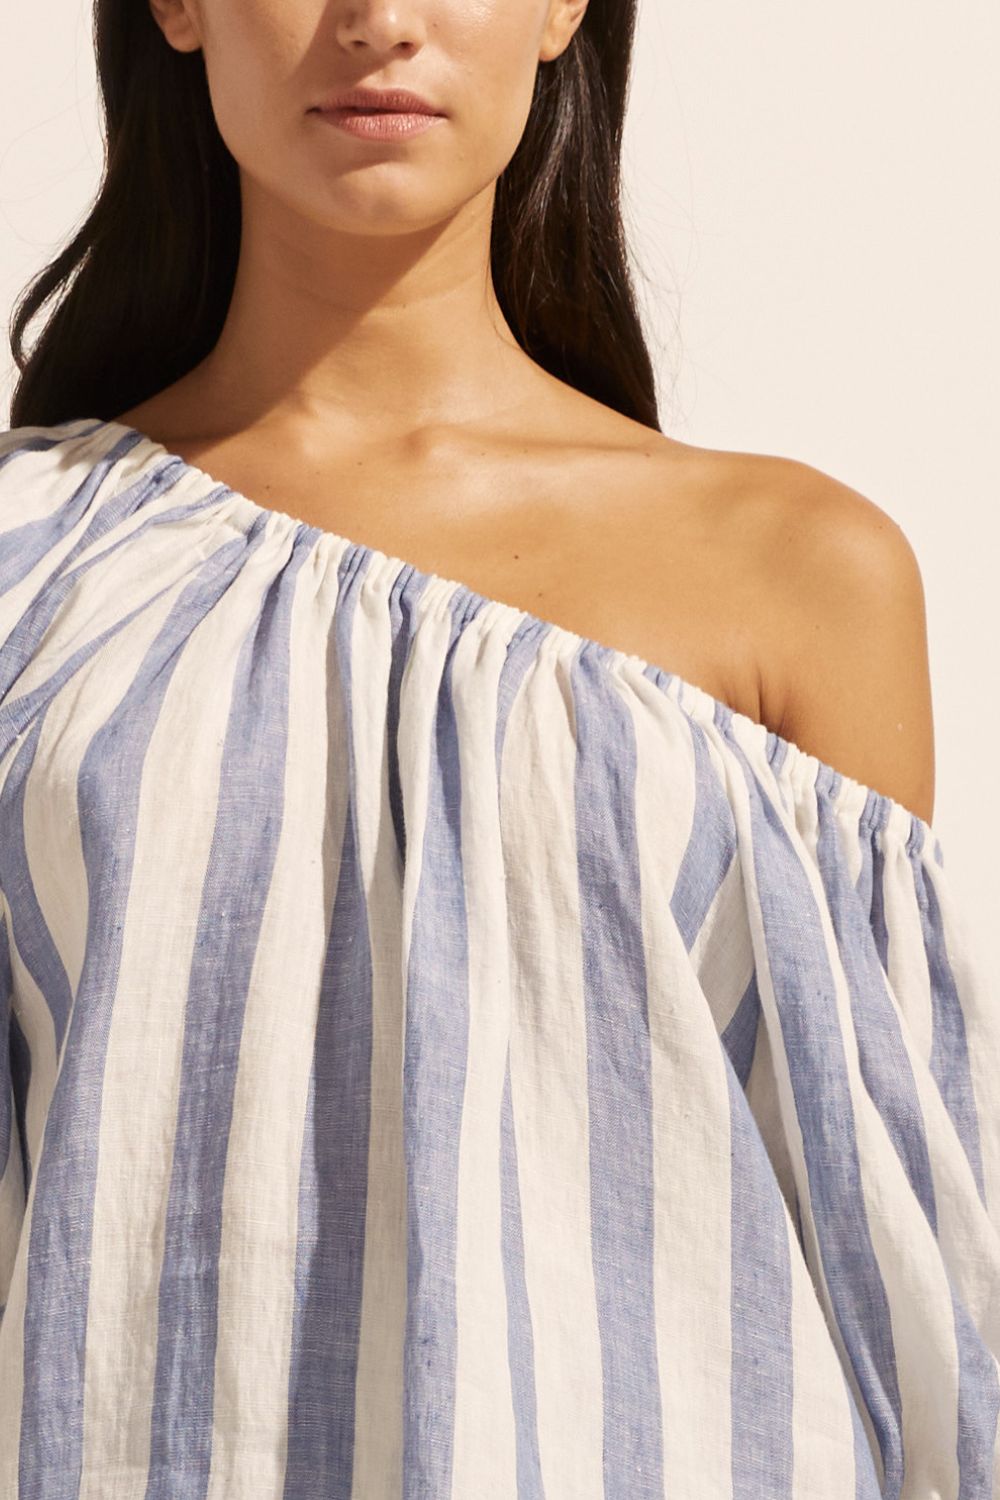 blue and white stripe, top, off the shoulder, mid length sleeve, close up image